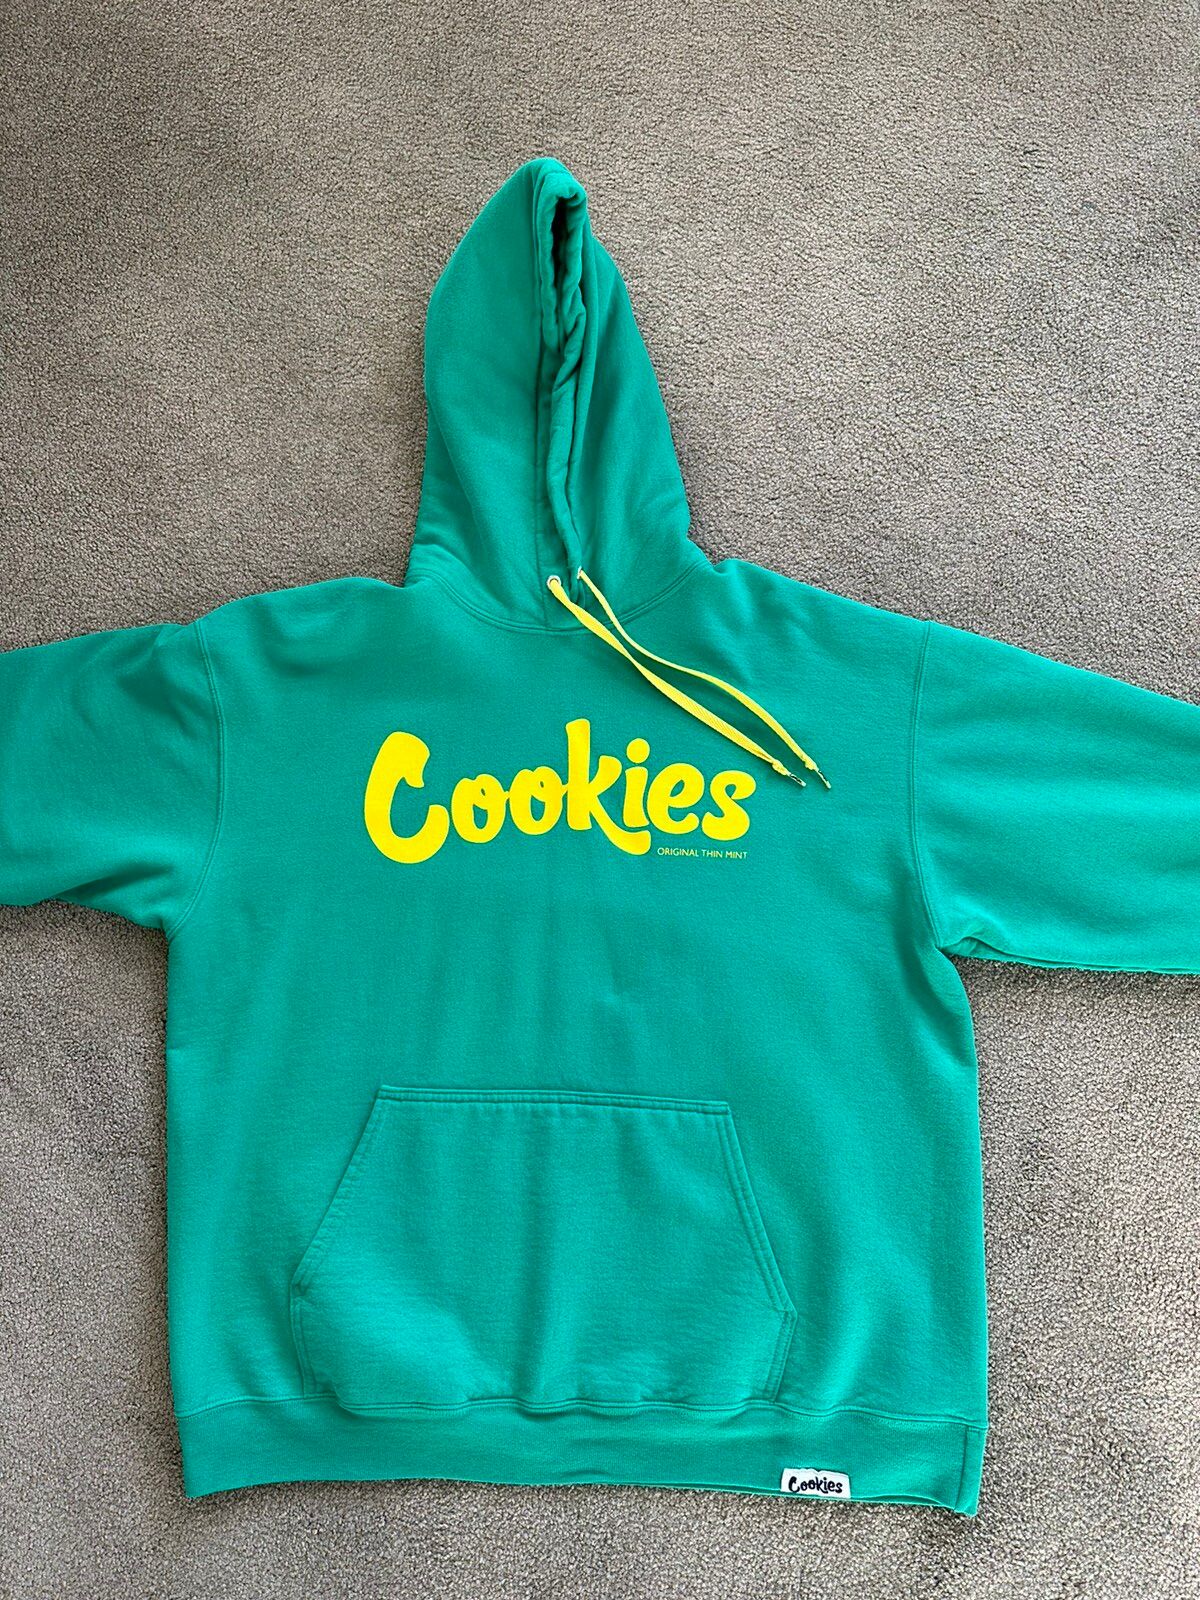 Cookies Cookies Hoodie Green/Yellow (Rare Color) Size US XL / EU 56 / 4 - 1 Preview